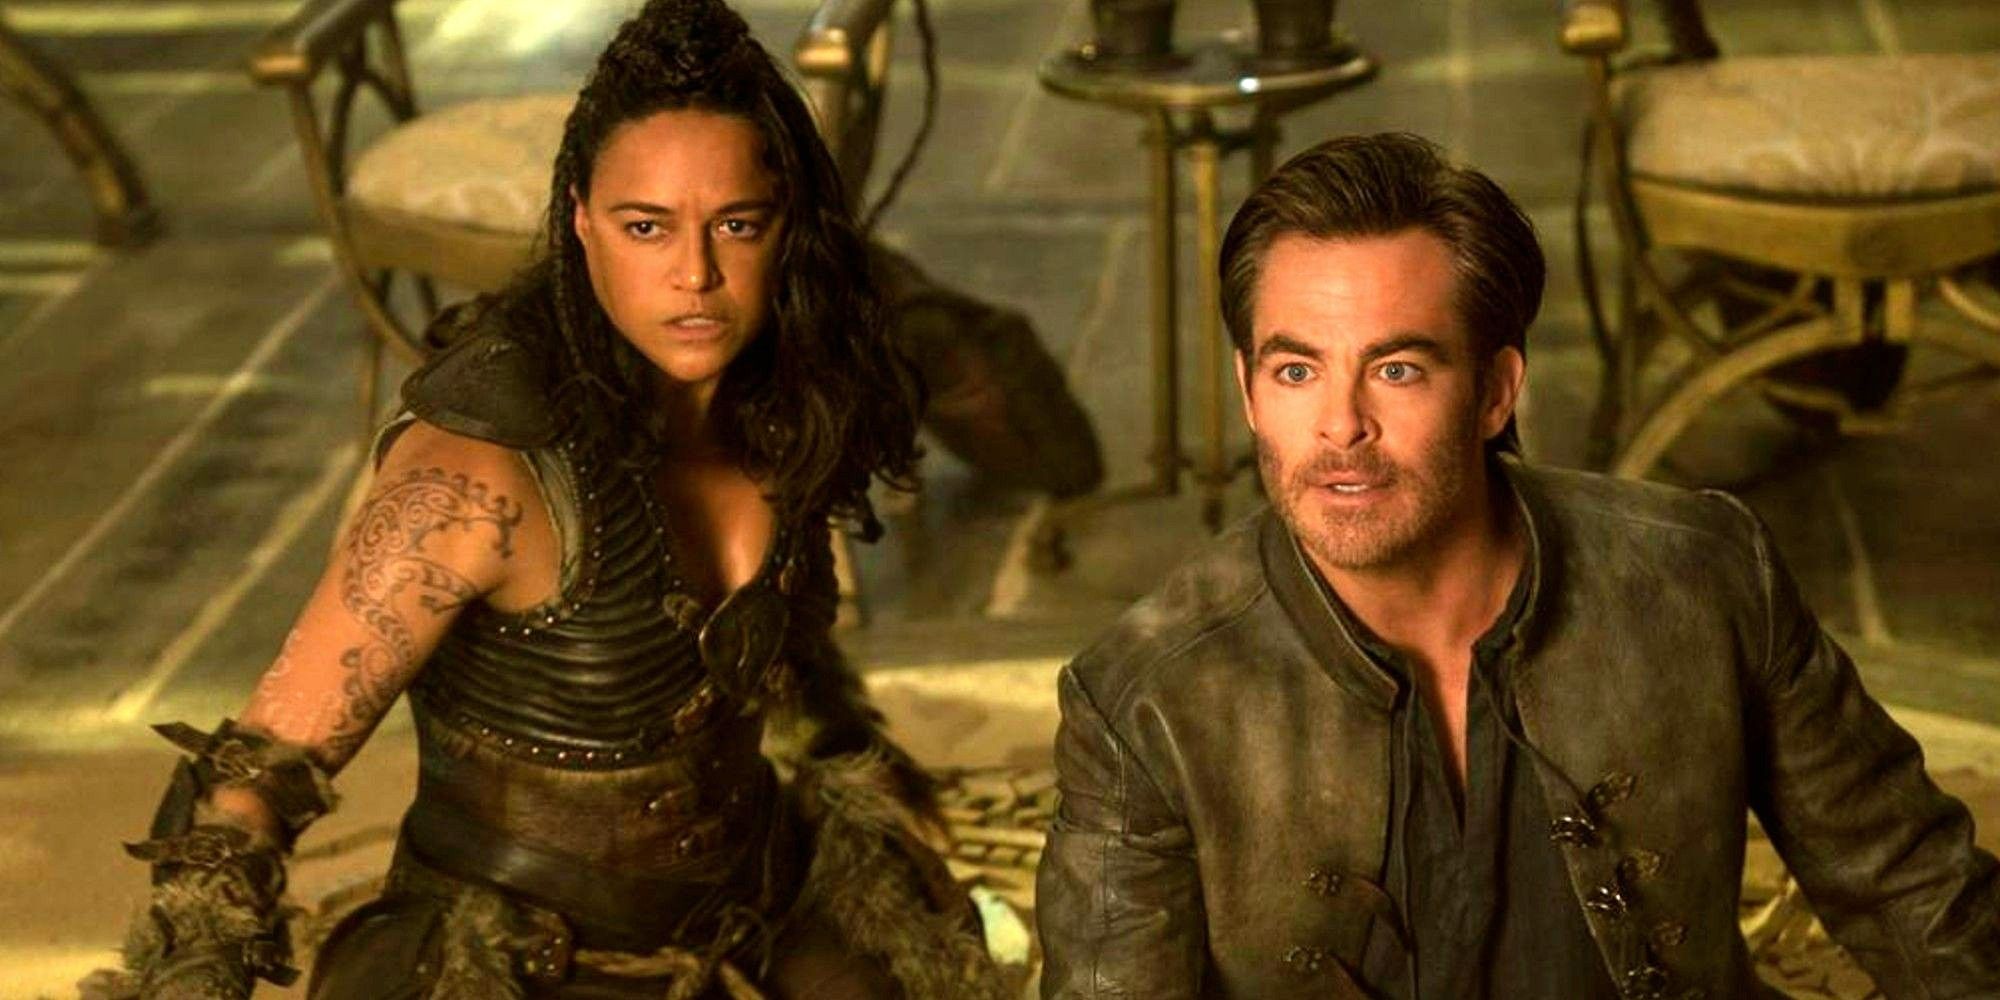 Michelle Rodriguez and Chris Pine as Holga and Edgin looking concerned in Dungeons and Dragons Honor Among Thieves